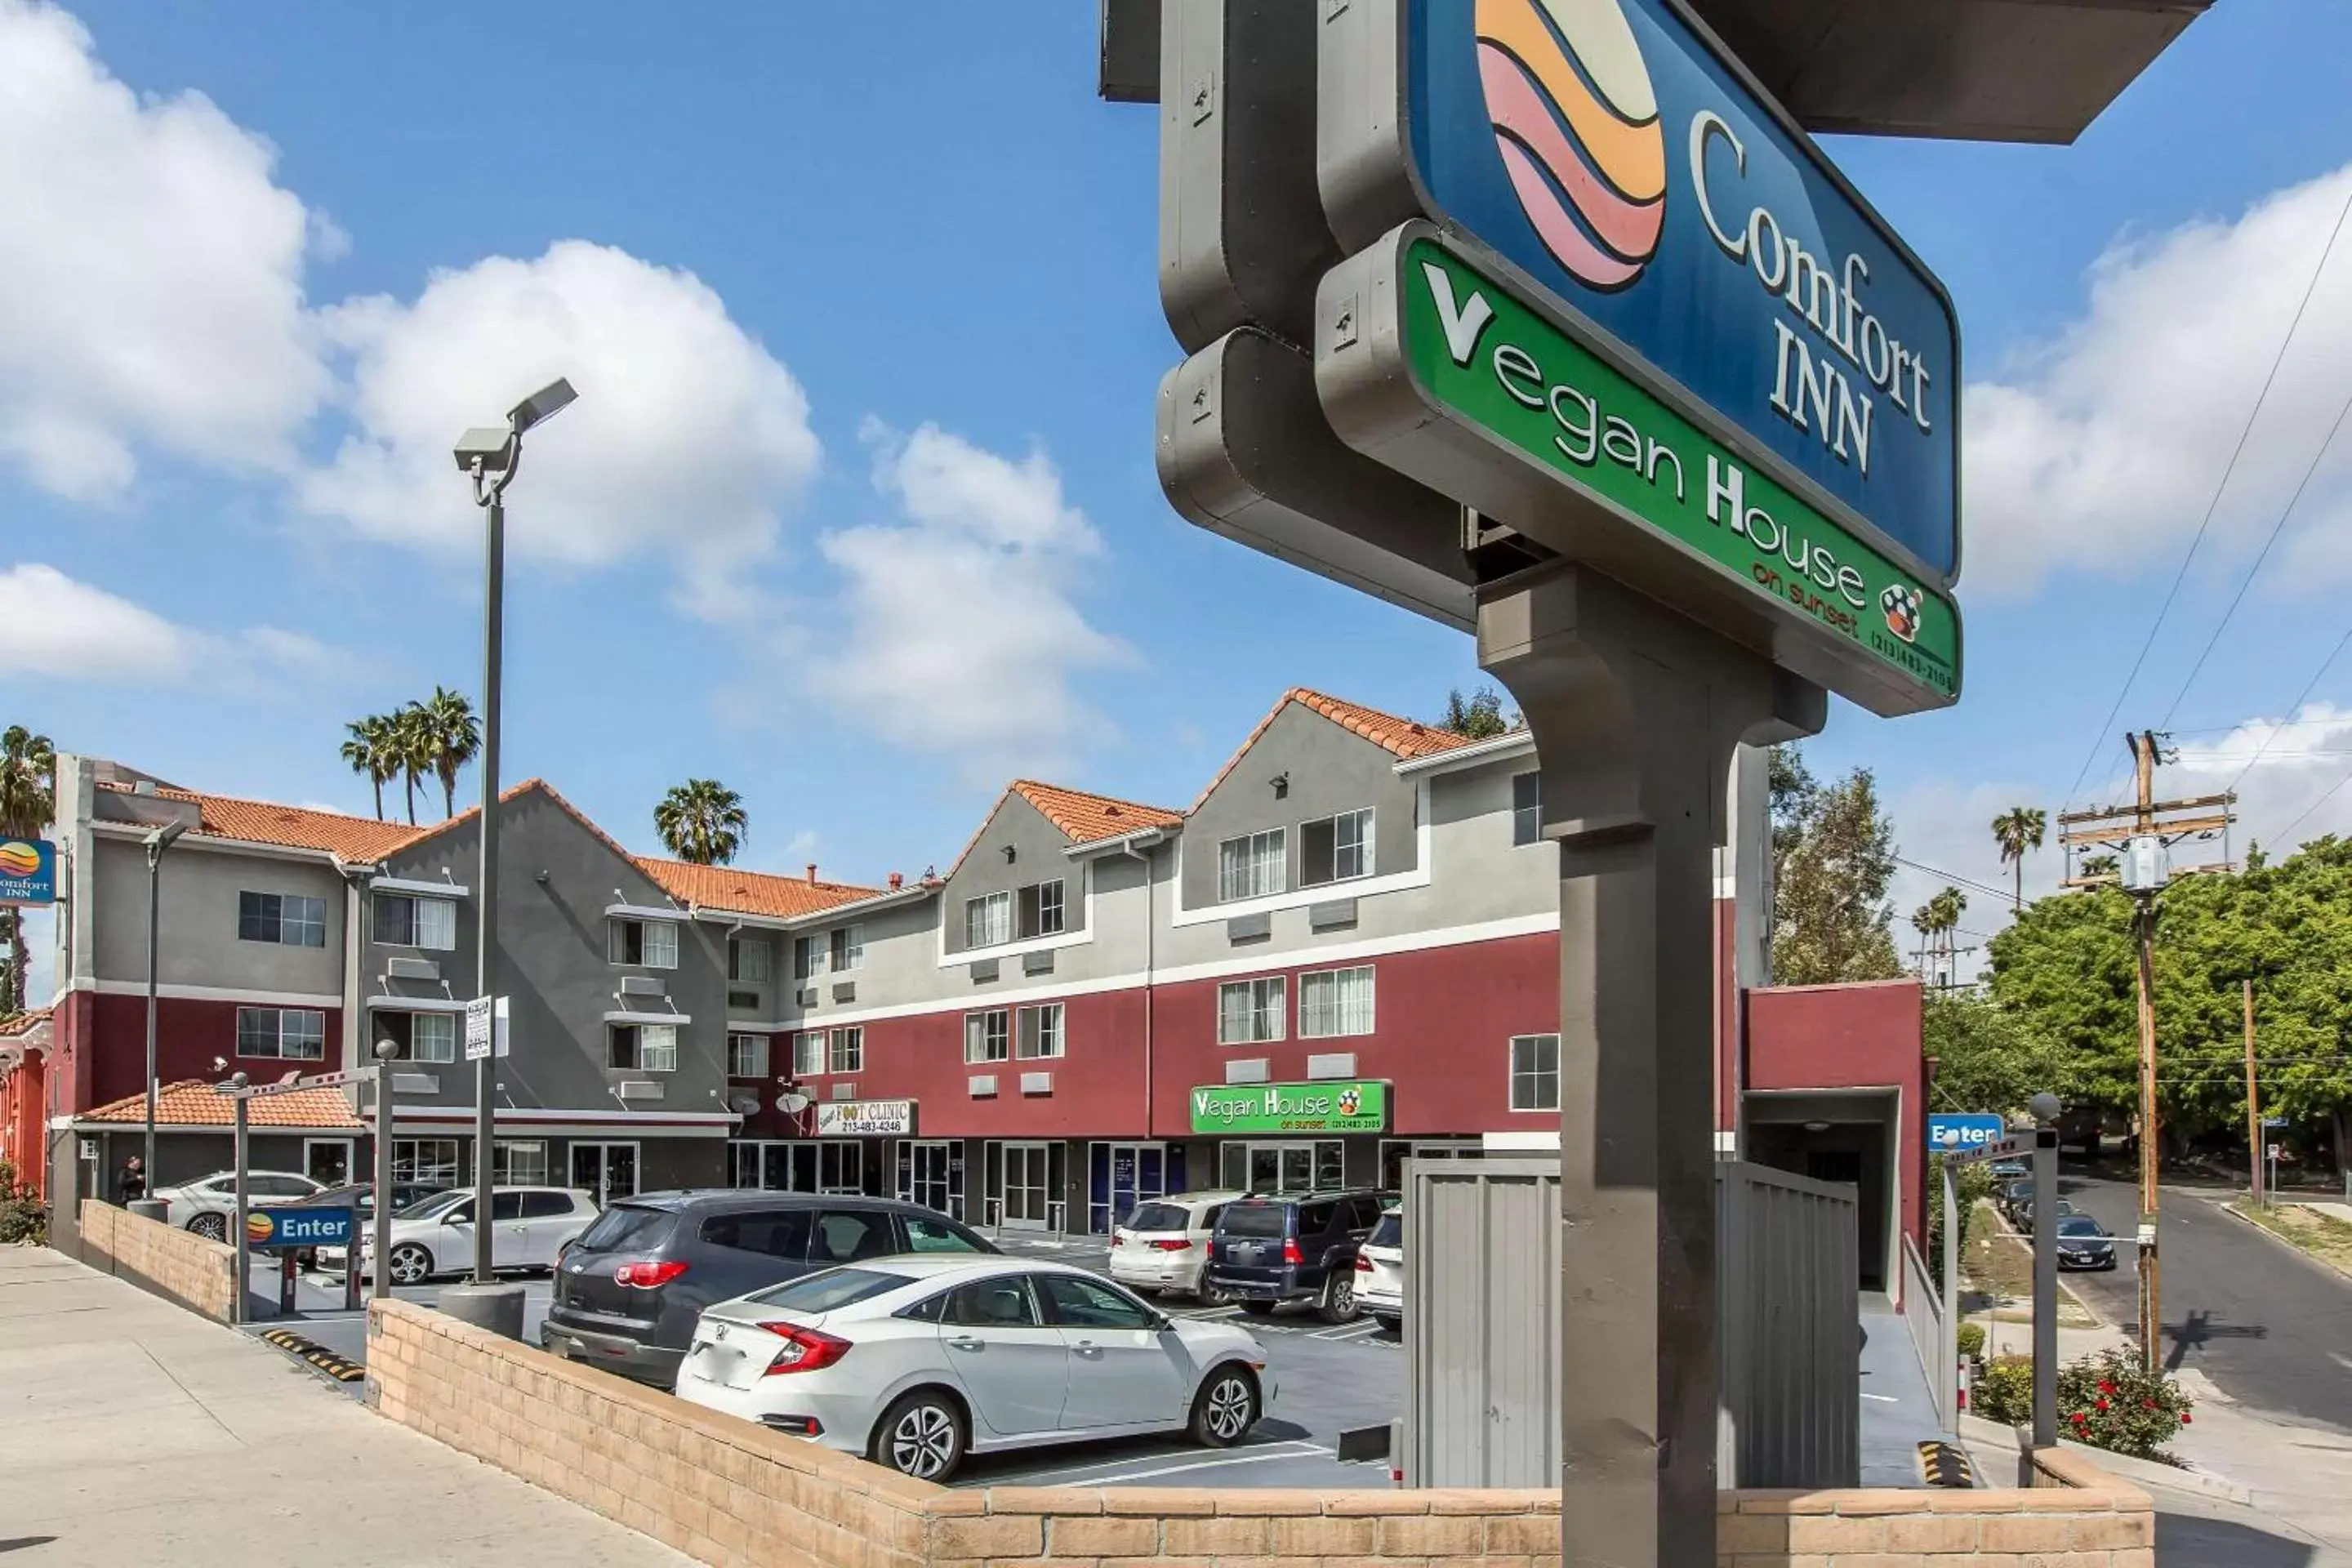 Property Building in Comfort Inn Los Angeles near Hollywood